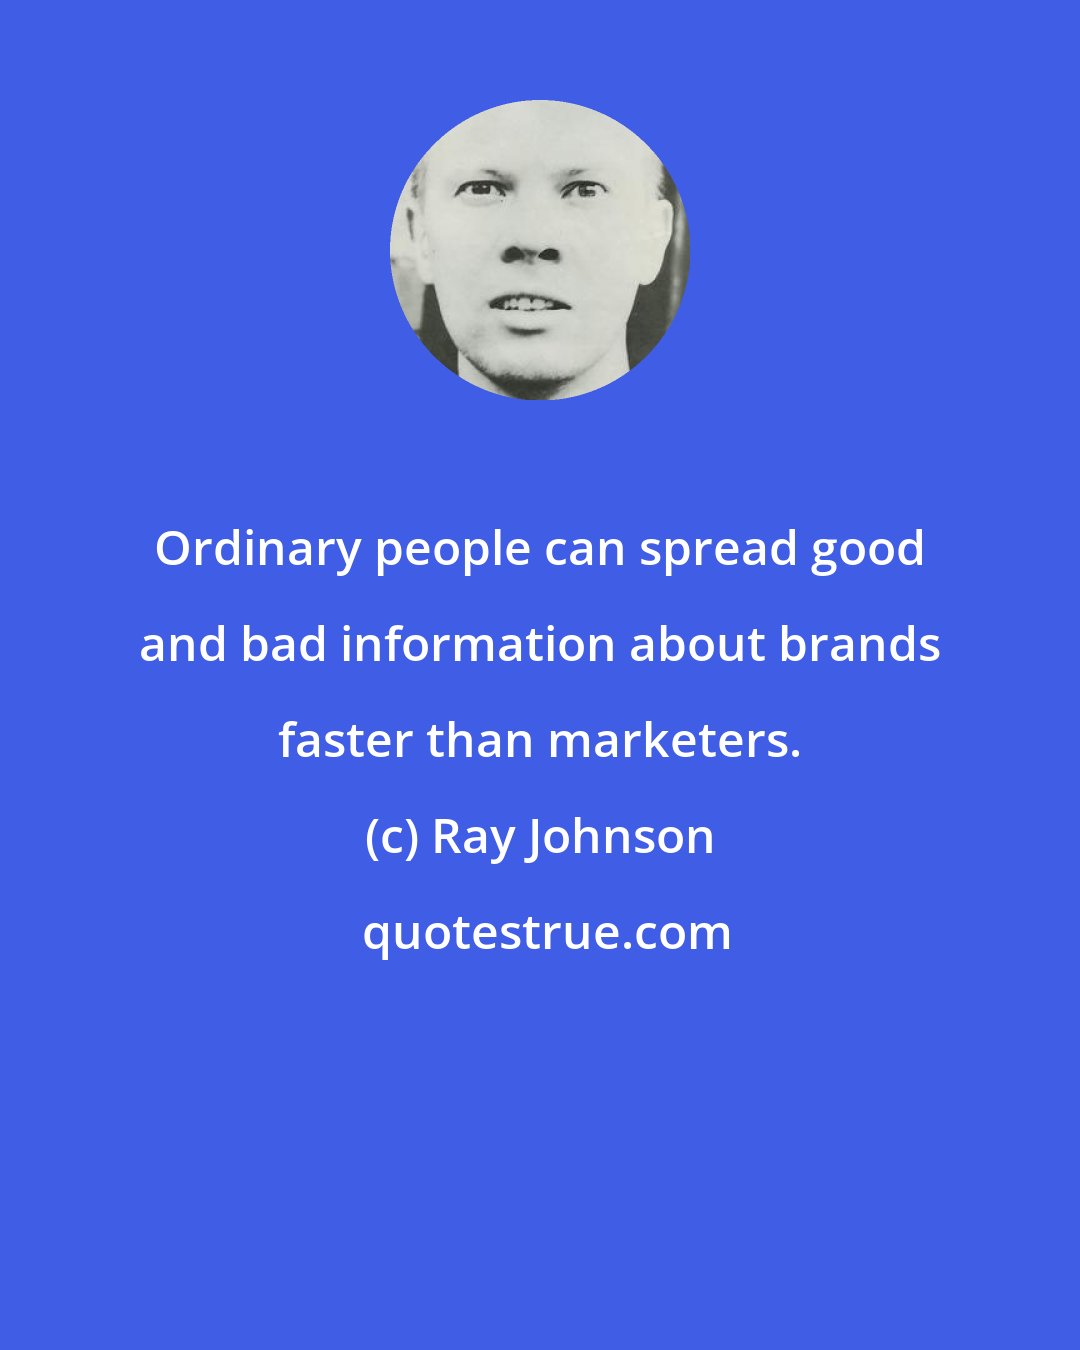 Ray Johnson: Ordinary people can spread good and bad information about brands faster than marketers.